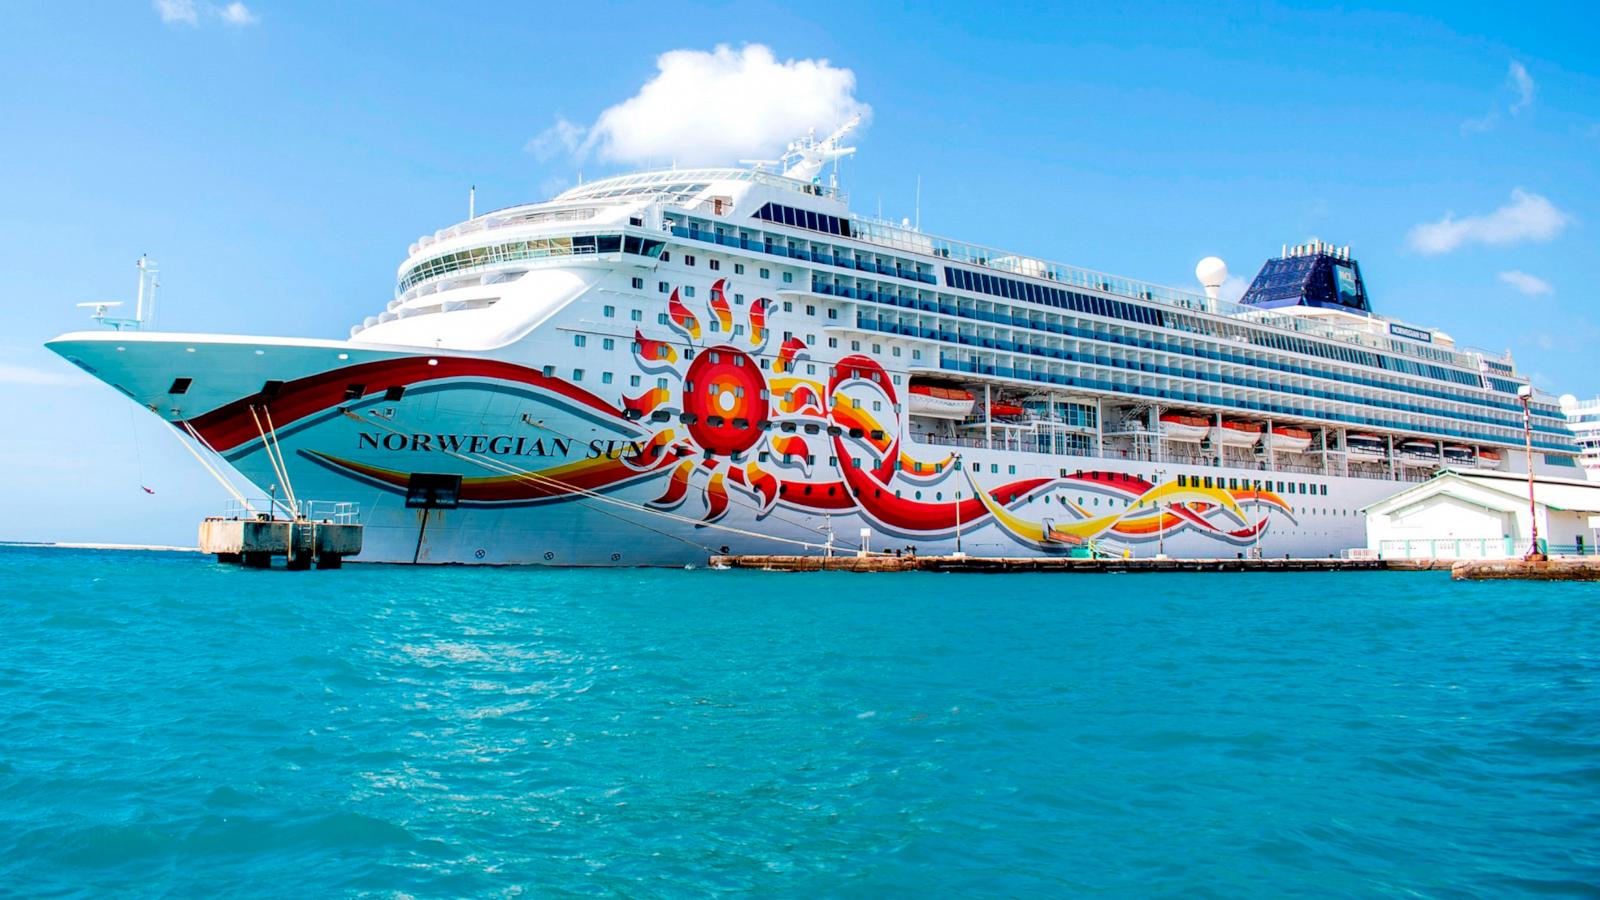 PHOTO: In this April 23, 2021, file photo, the cruise ship Norwegian Sun from Norwegian Cruise Line is shown near the island of Aruba.